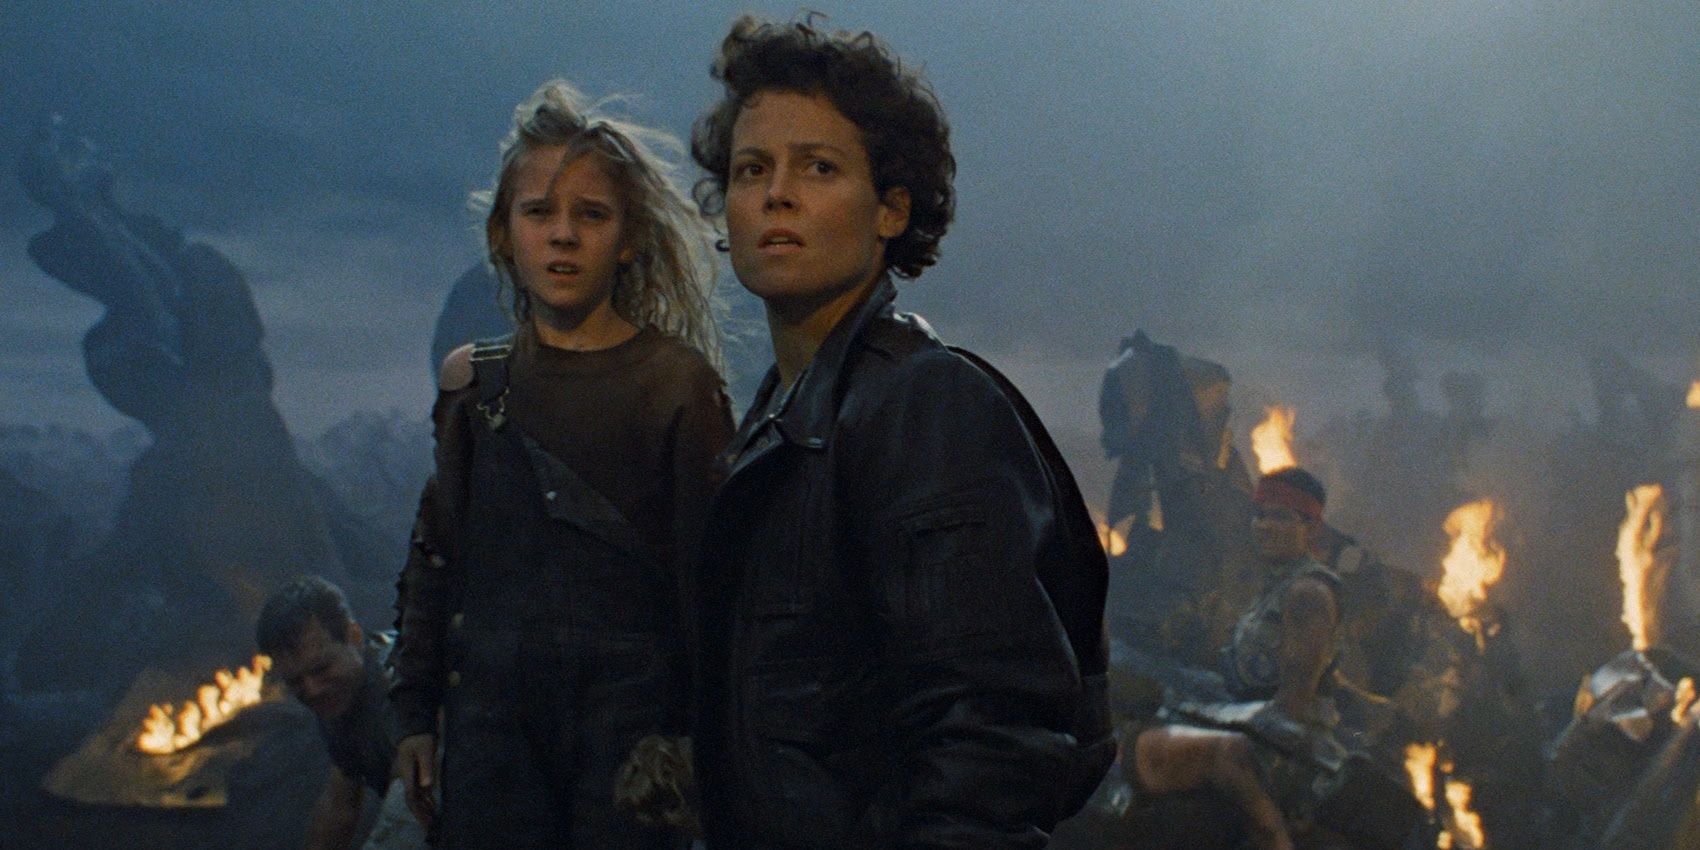 Ripley and Newt standing in the wreckage of the ship in Aliens